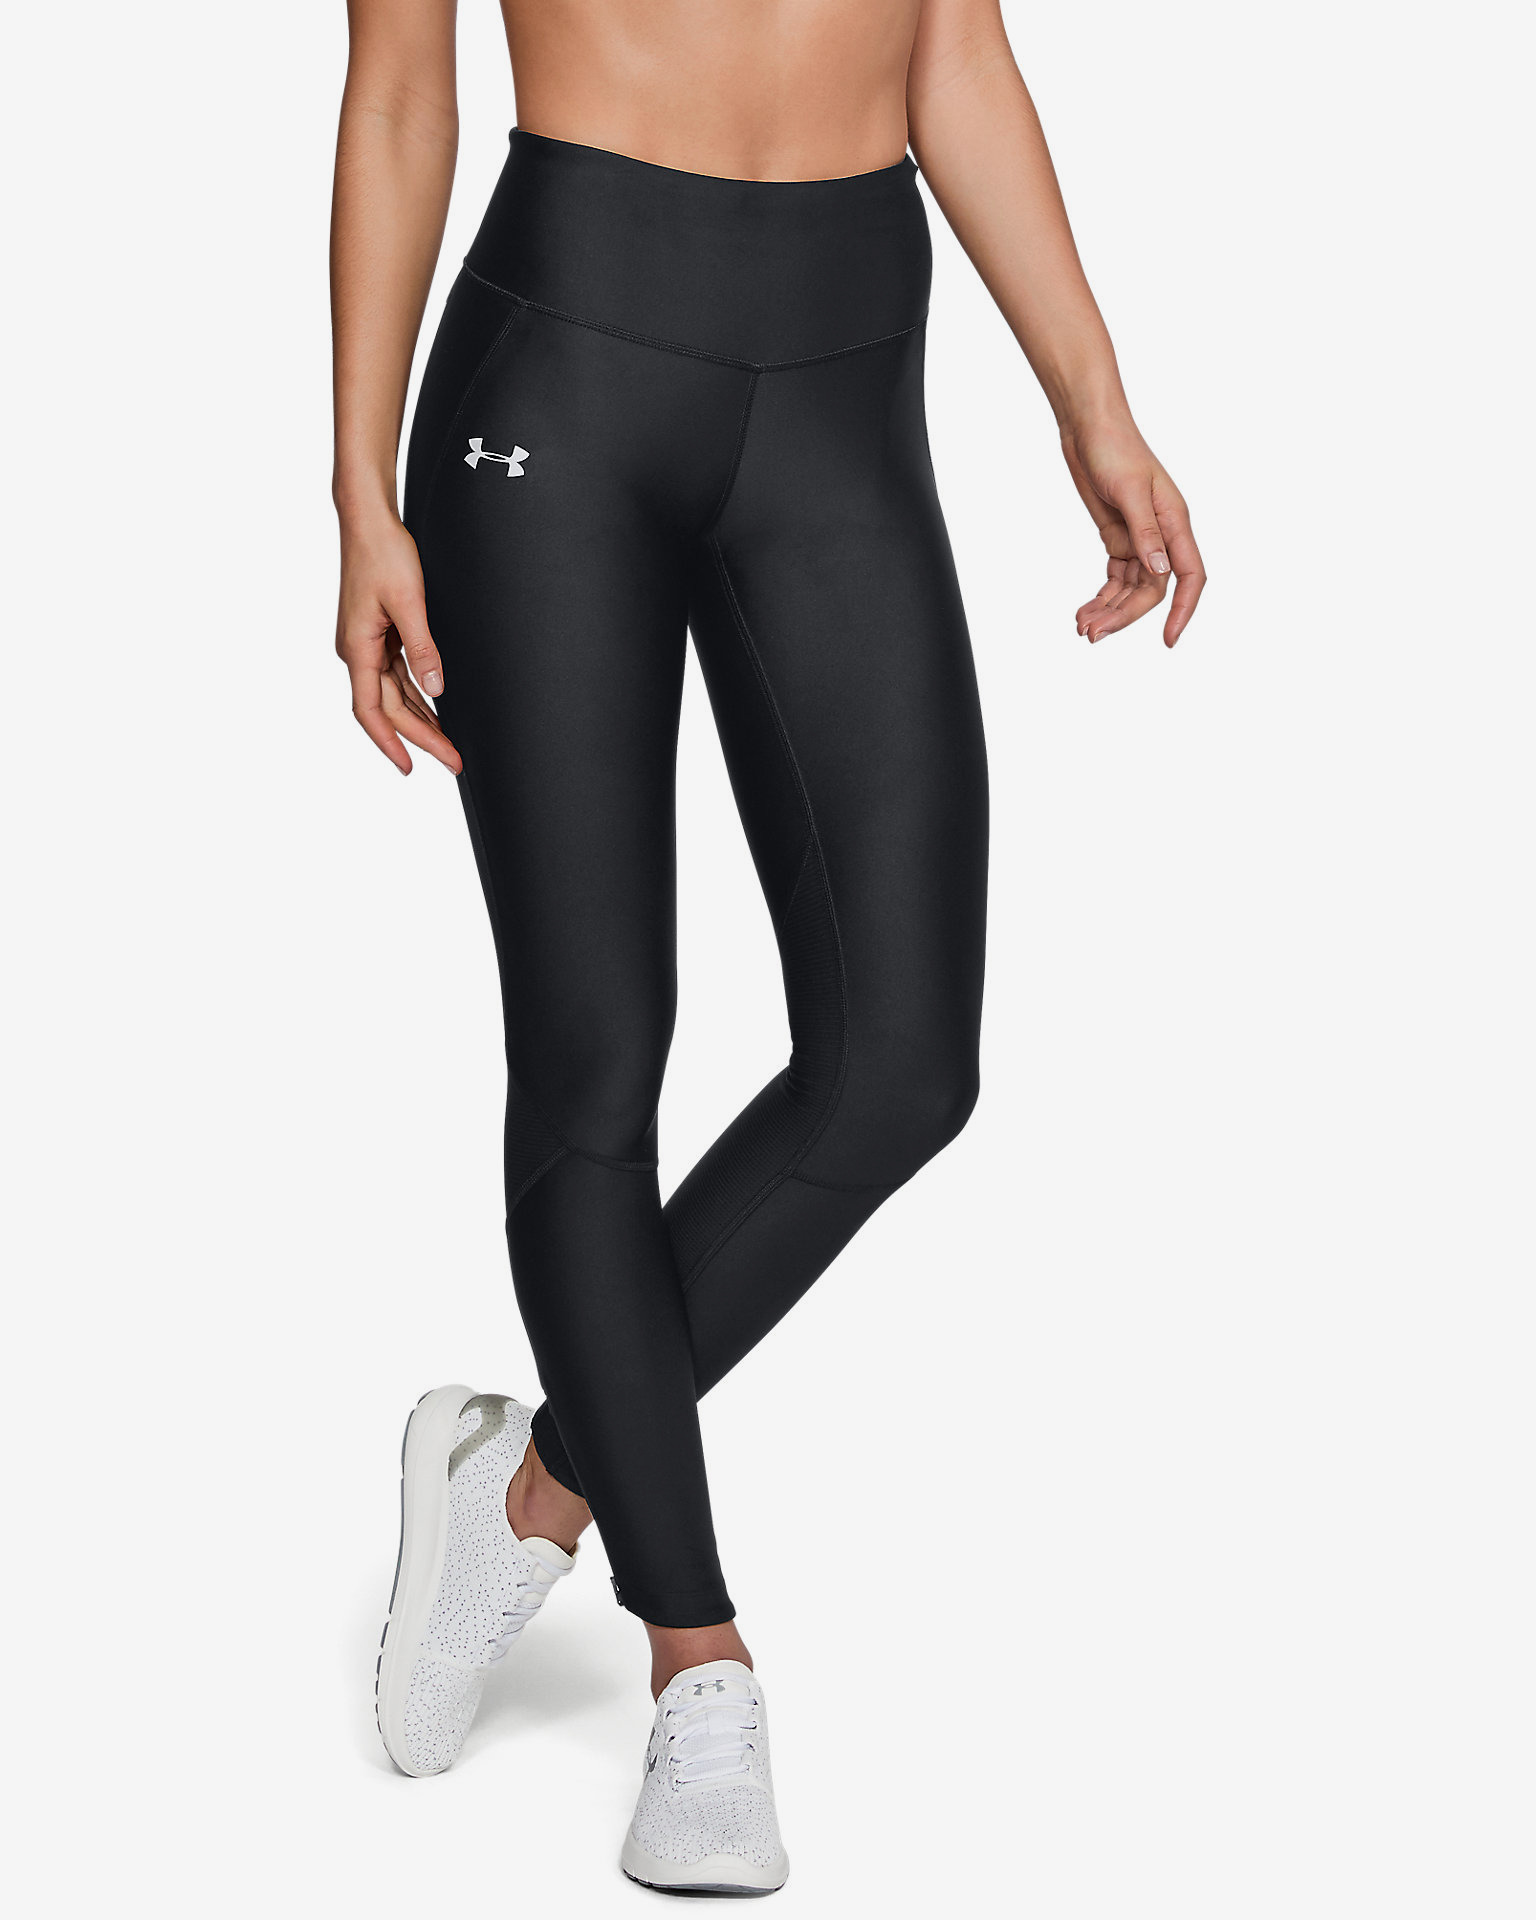 Under Armour Fly Fast High Tights Mens